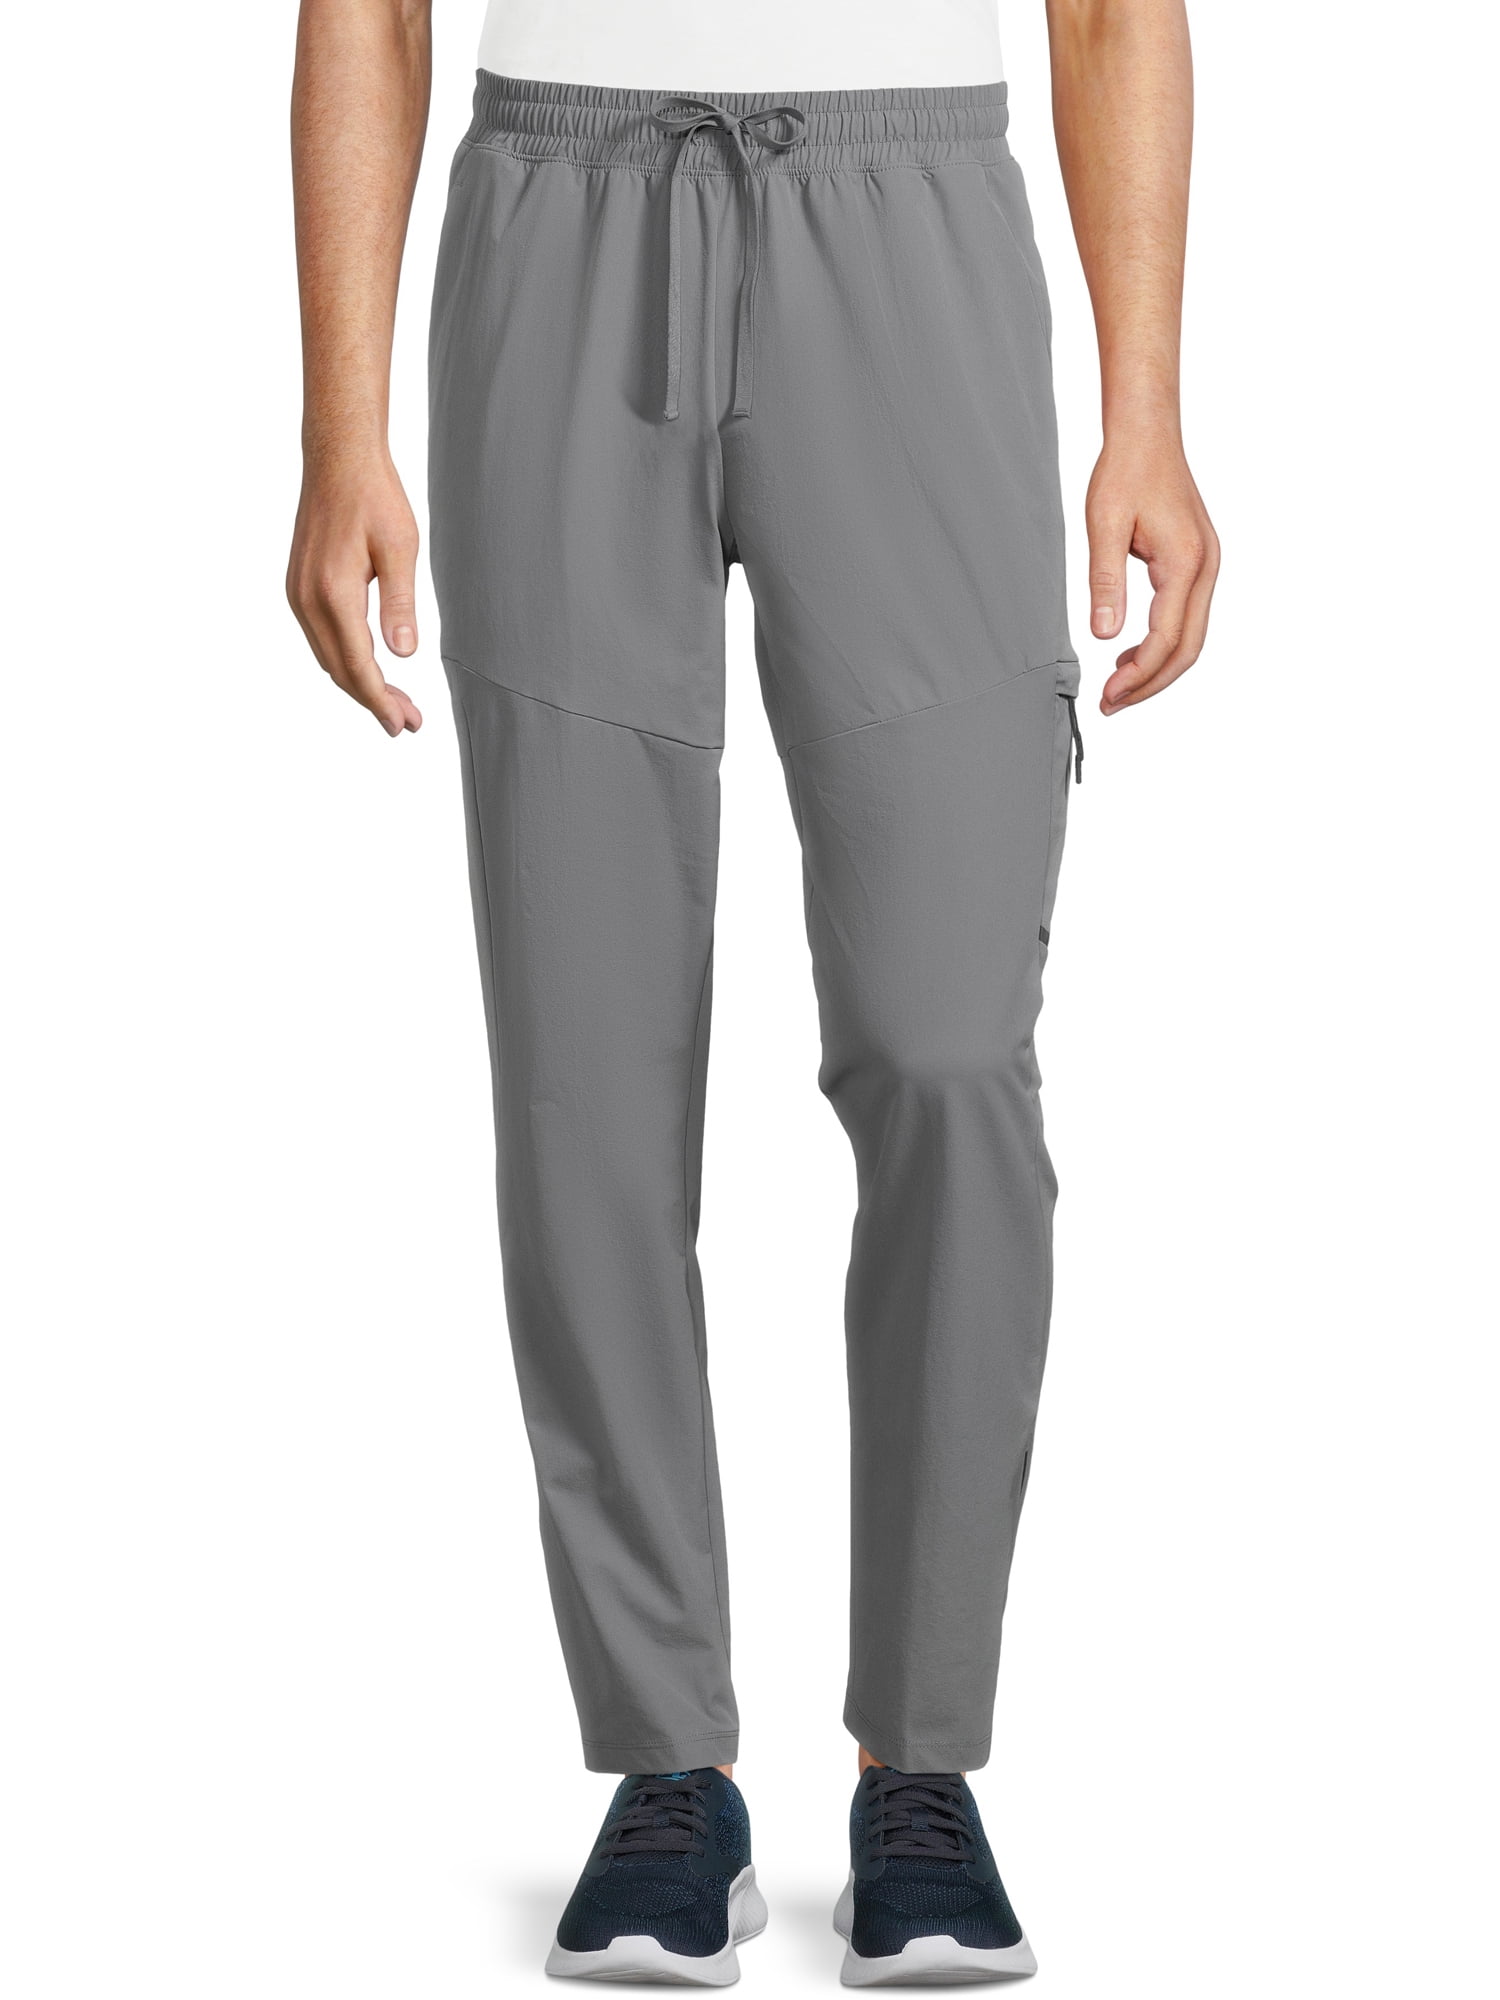 Athletic Works Men's and Big Men's Woven Stretch Active Pants